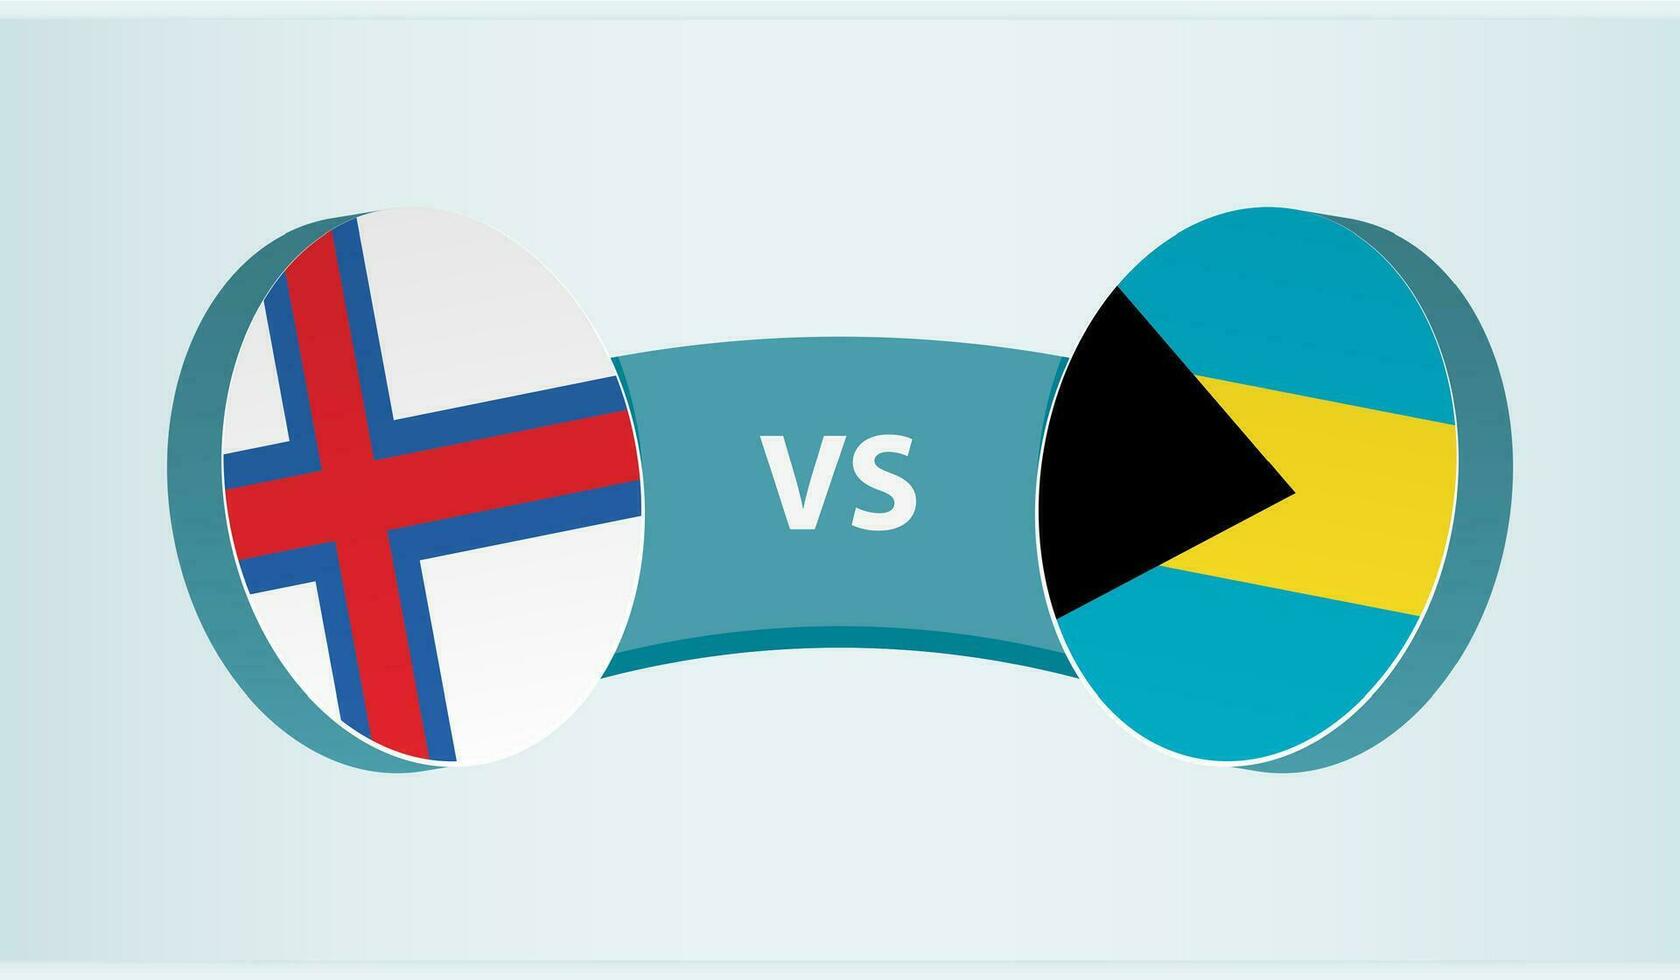 Faroe Islands versus The Bahamas, team sports competition concept. vector